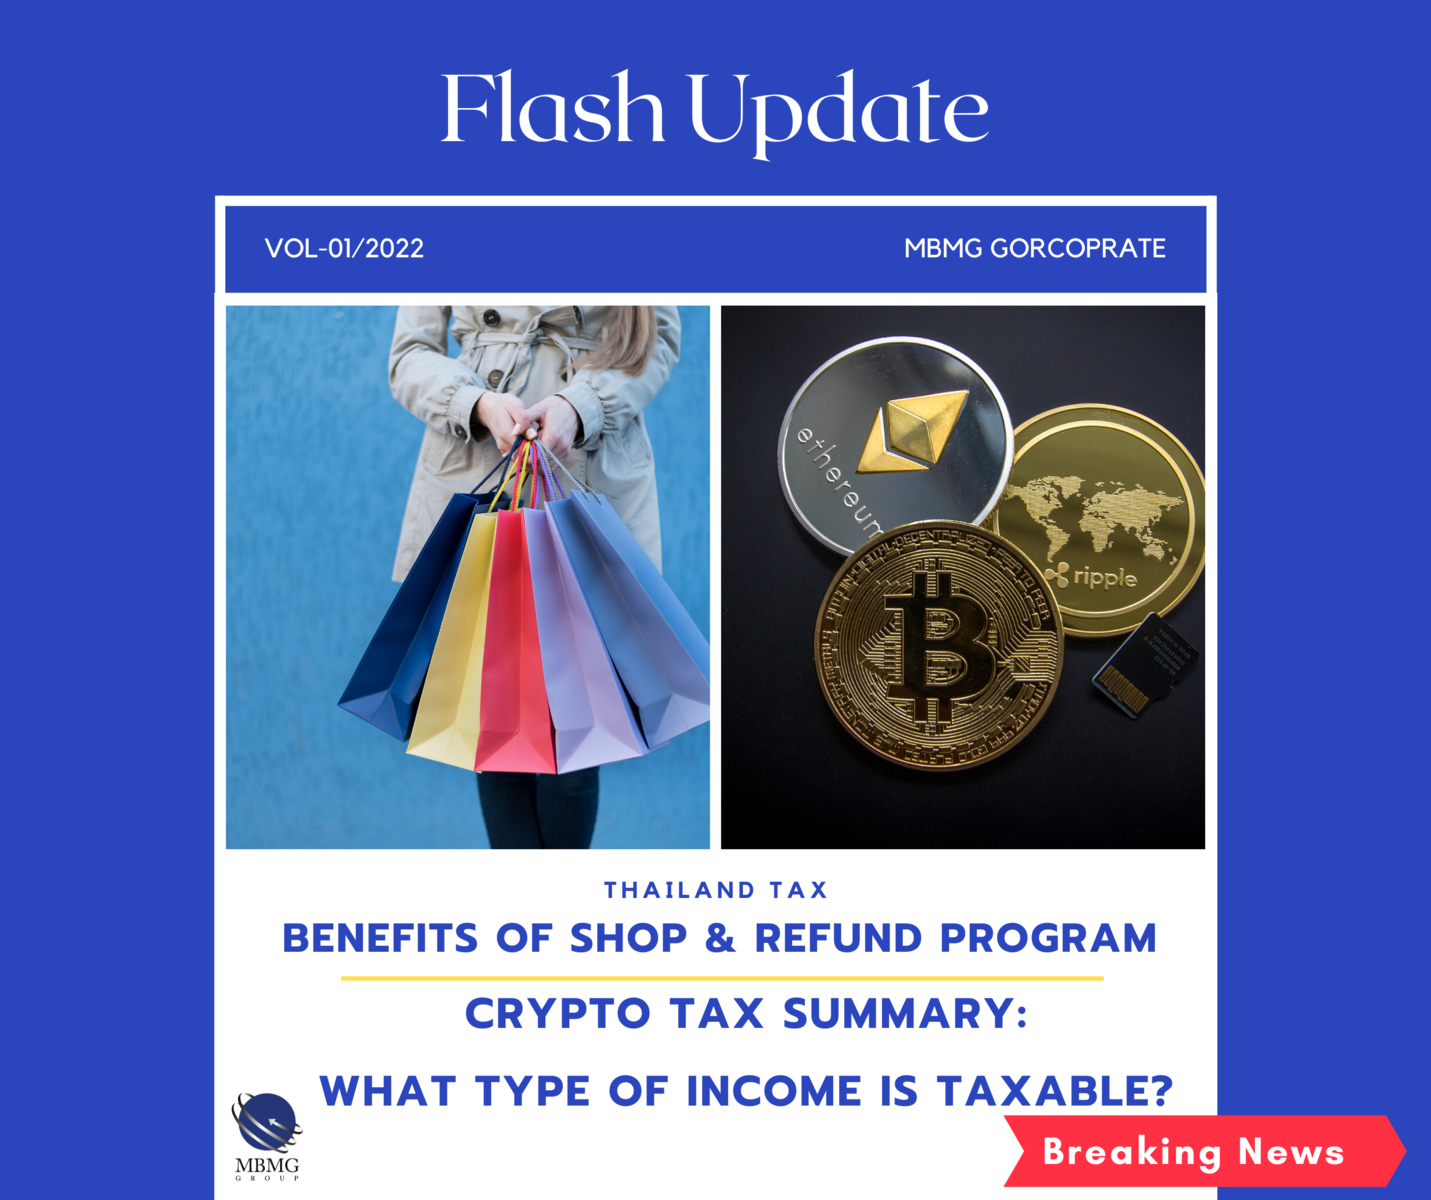 summary-of-benefits-of-shop-refund-program-crypto-tax-what